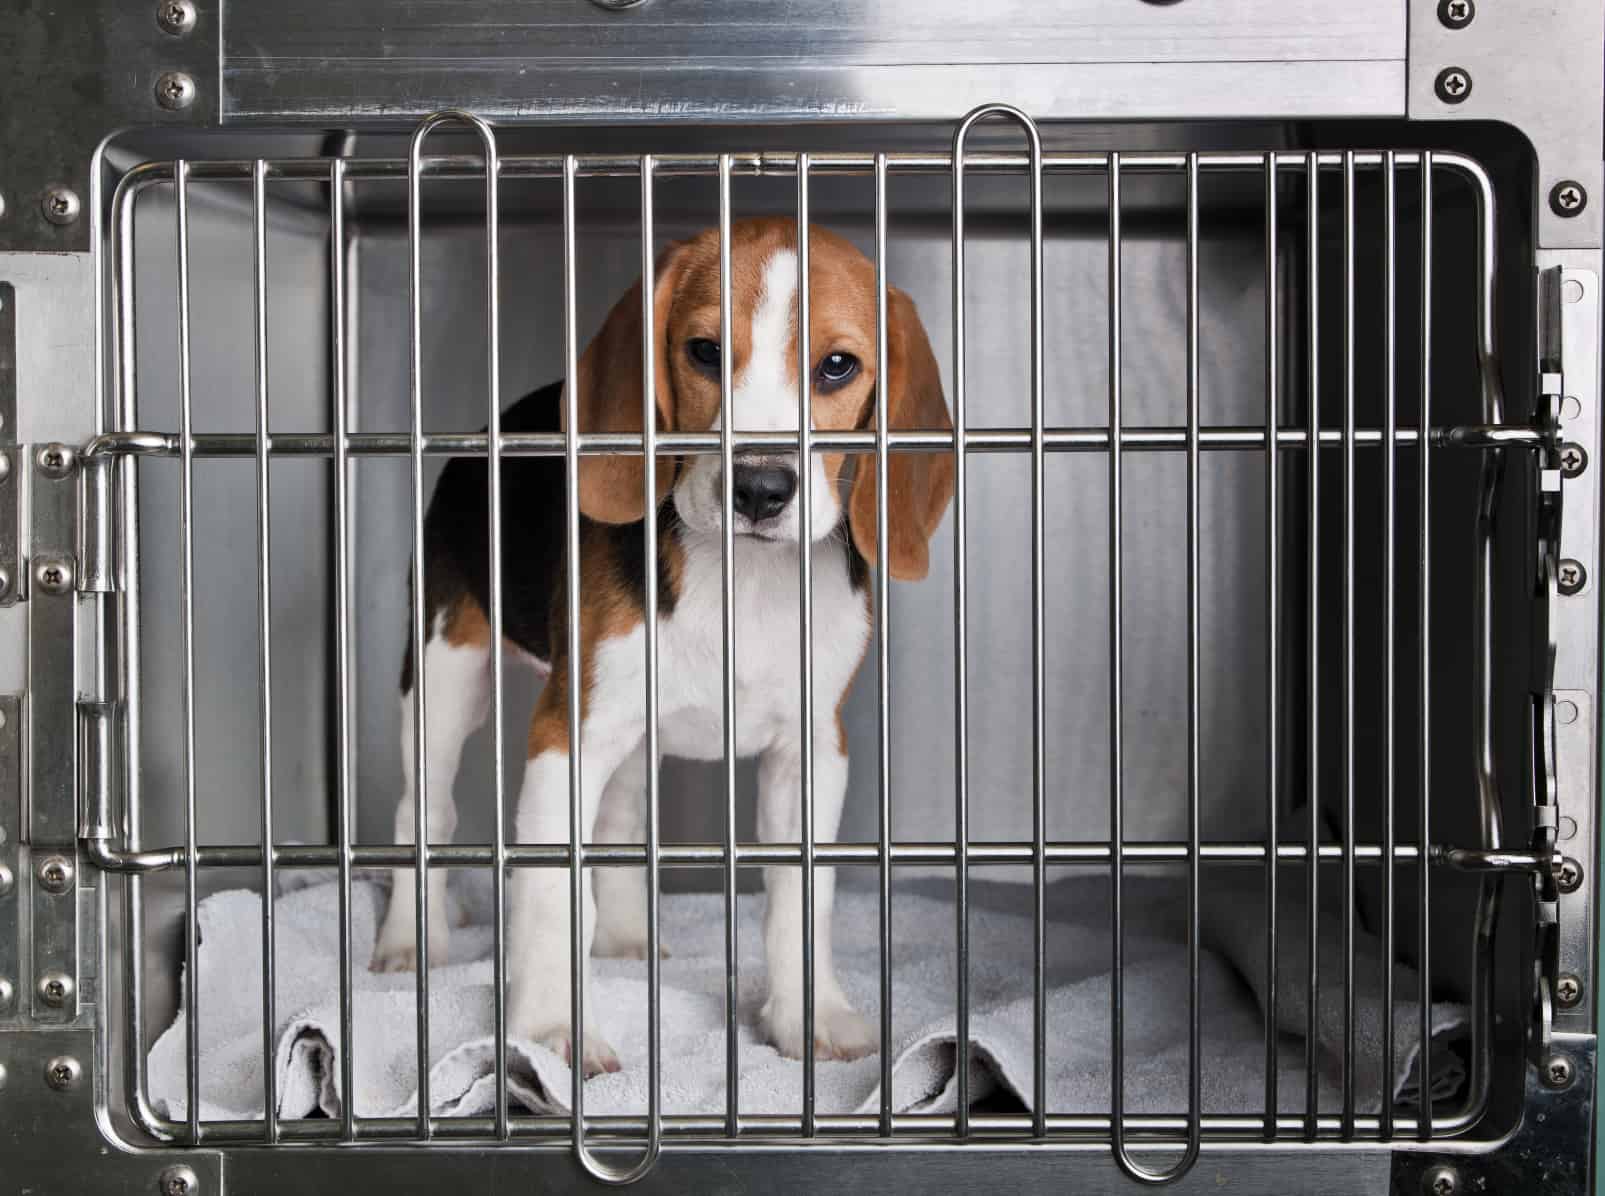 Home Office statistics reveal no meaningful decline in UK animal experiments in a decade despite government pledge